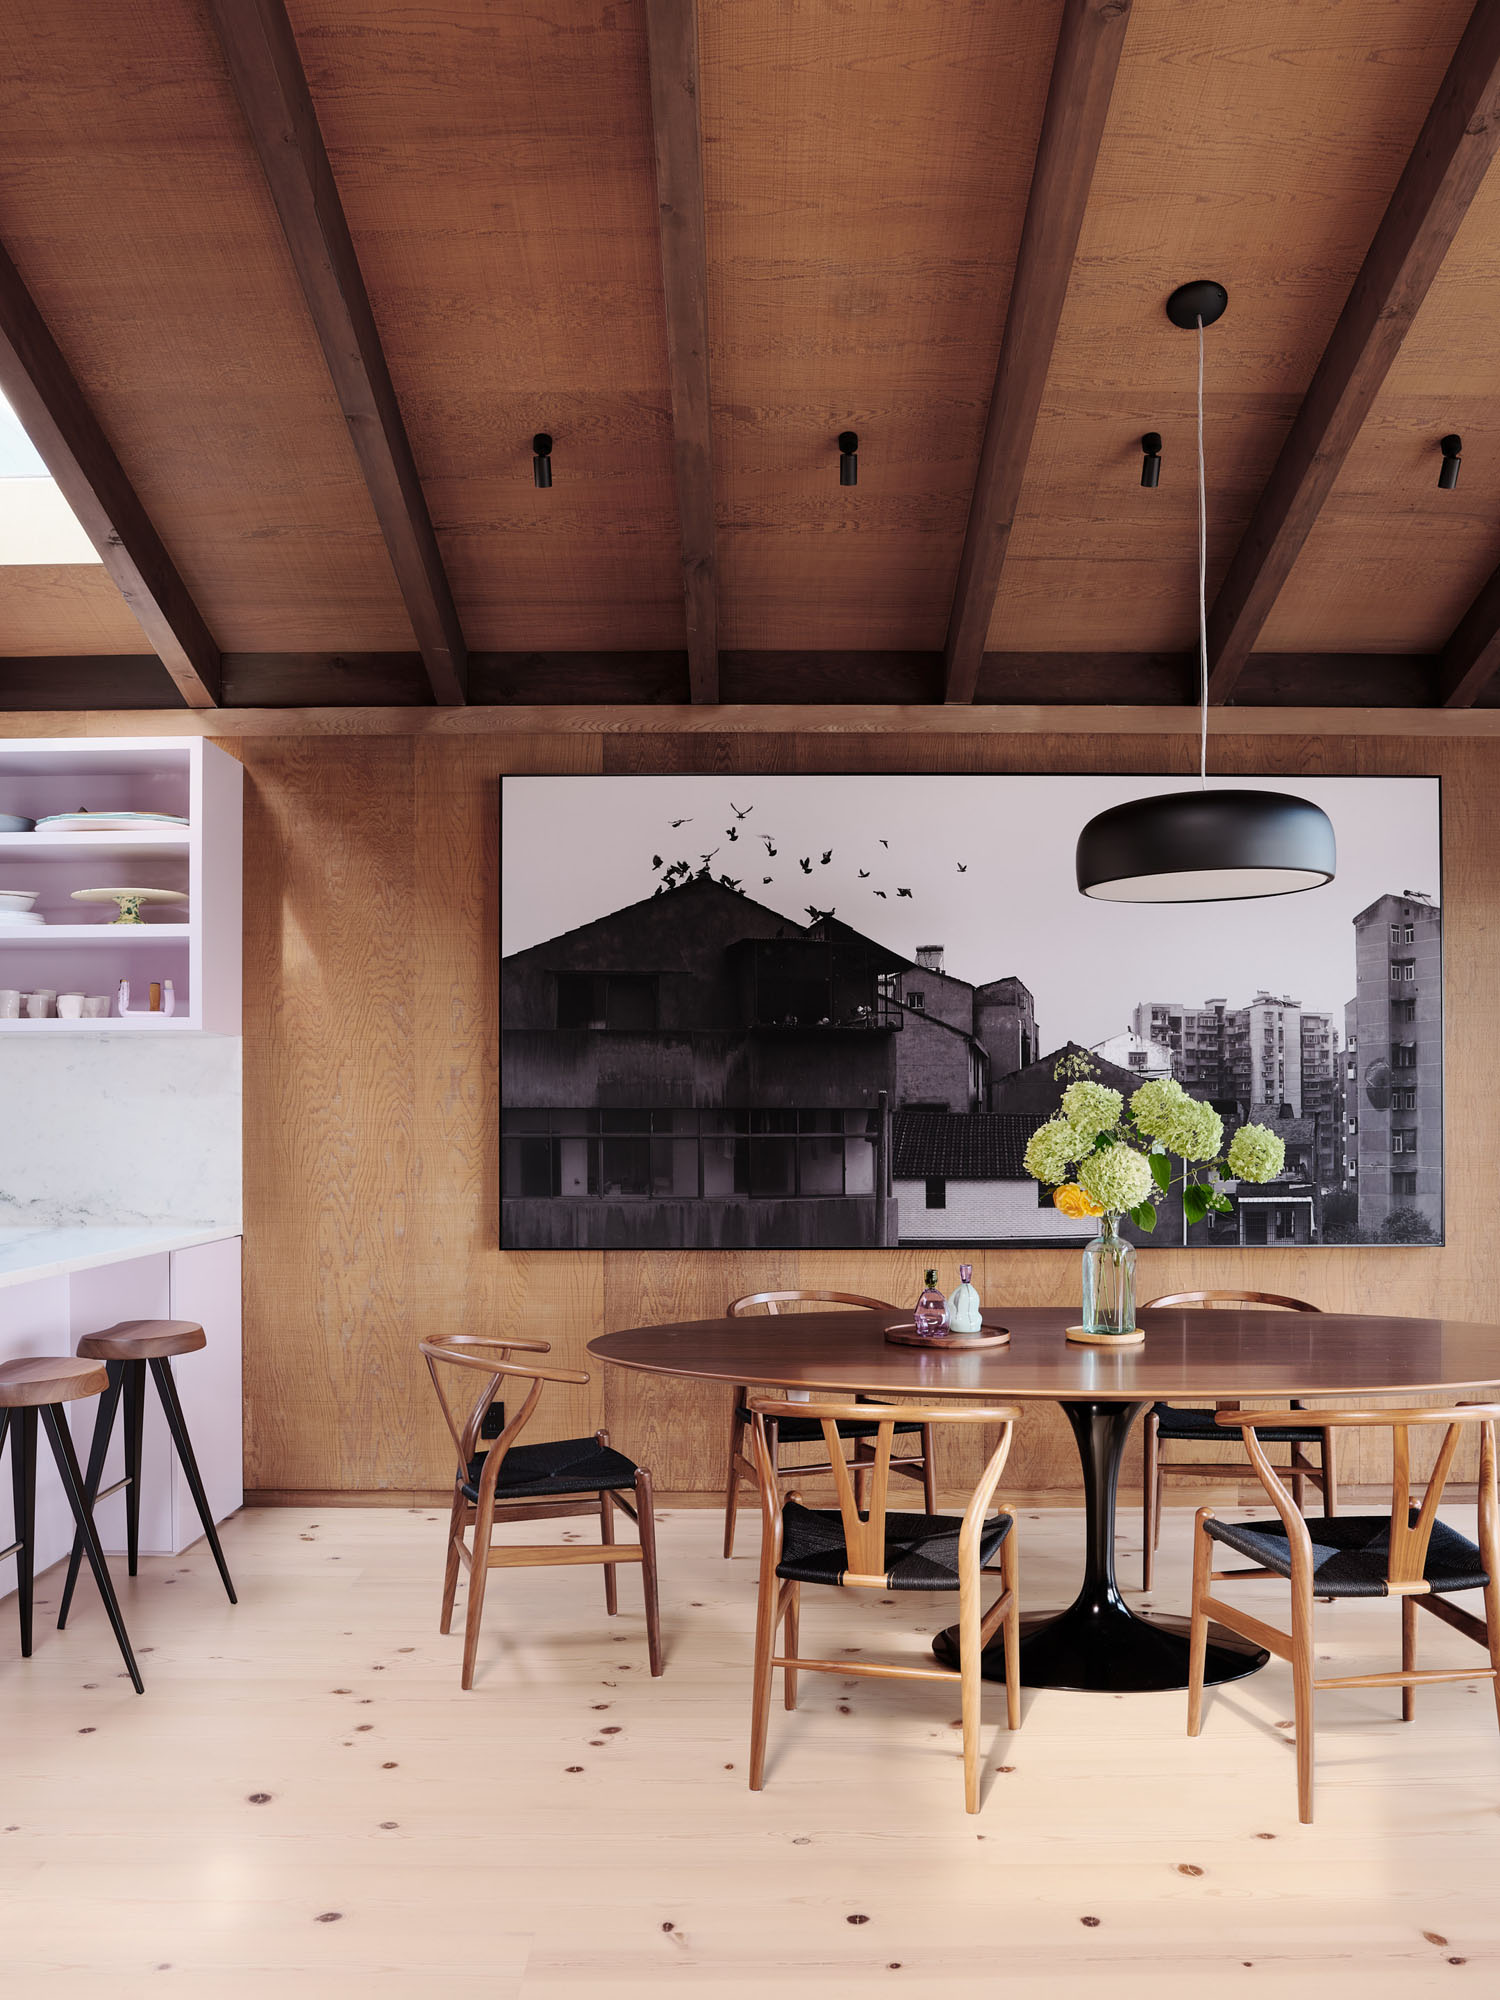 image of a dining room with light wood floors and dark wood ceilings